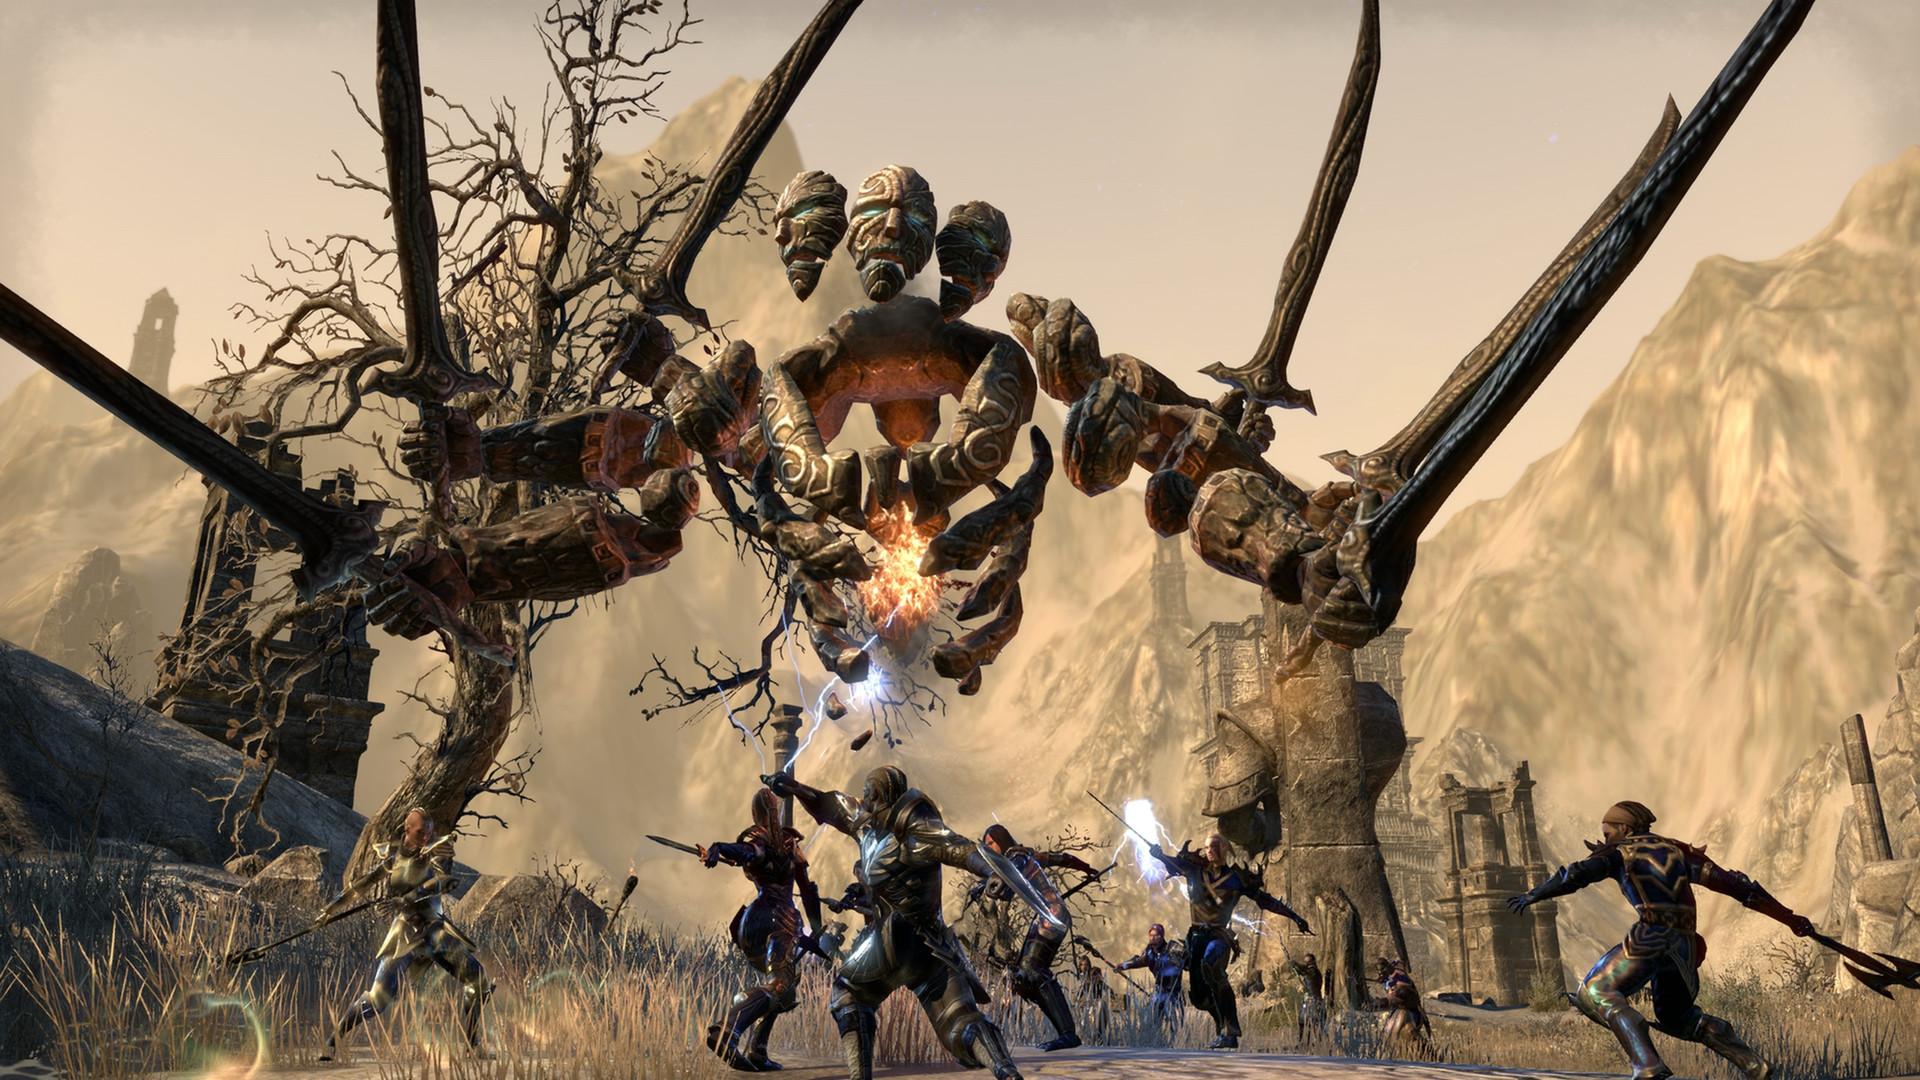 The Elder Scrolls Online's Next Expansion Takes Place in Elsweyr